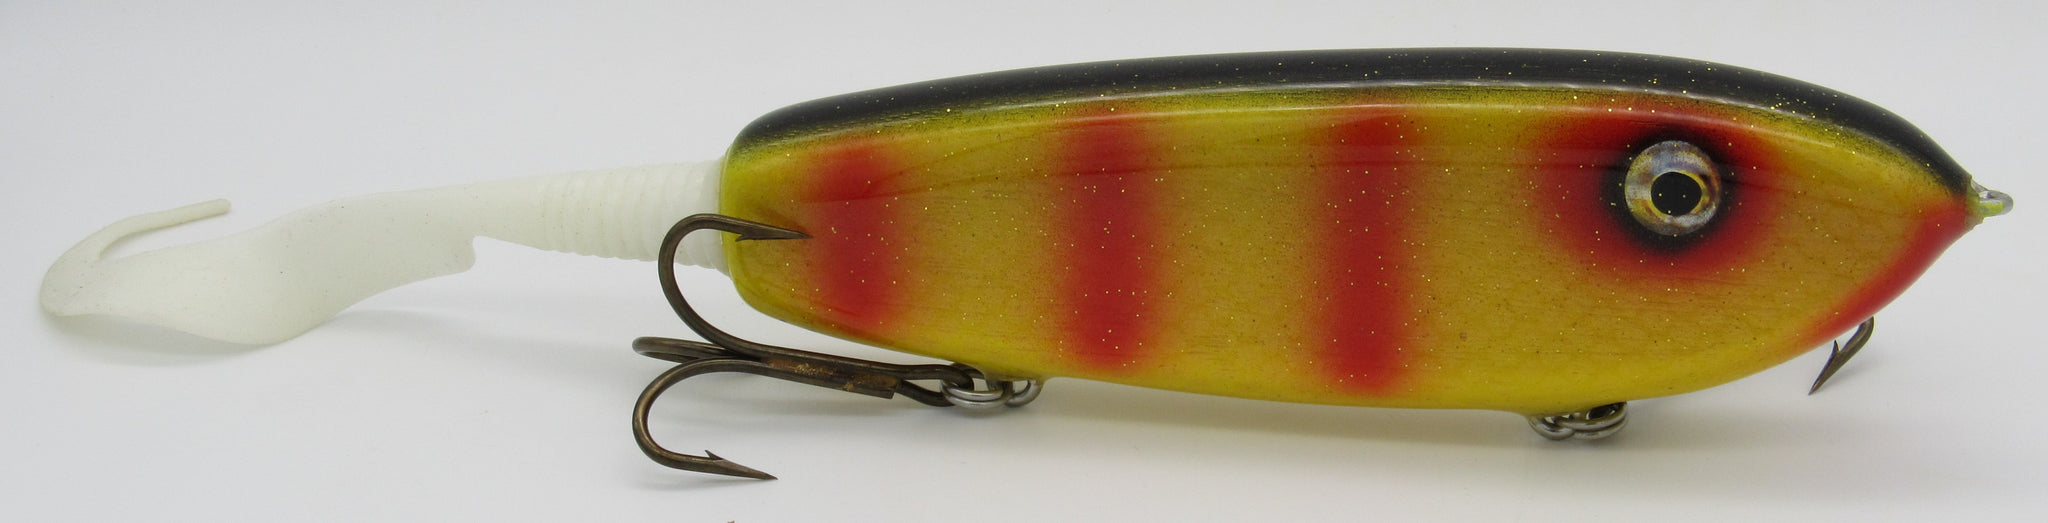 Hot Tail Gliders - Shallow Regular Hot Tail – St Lawrence Musky Shop